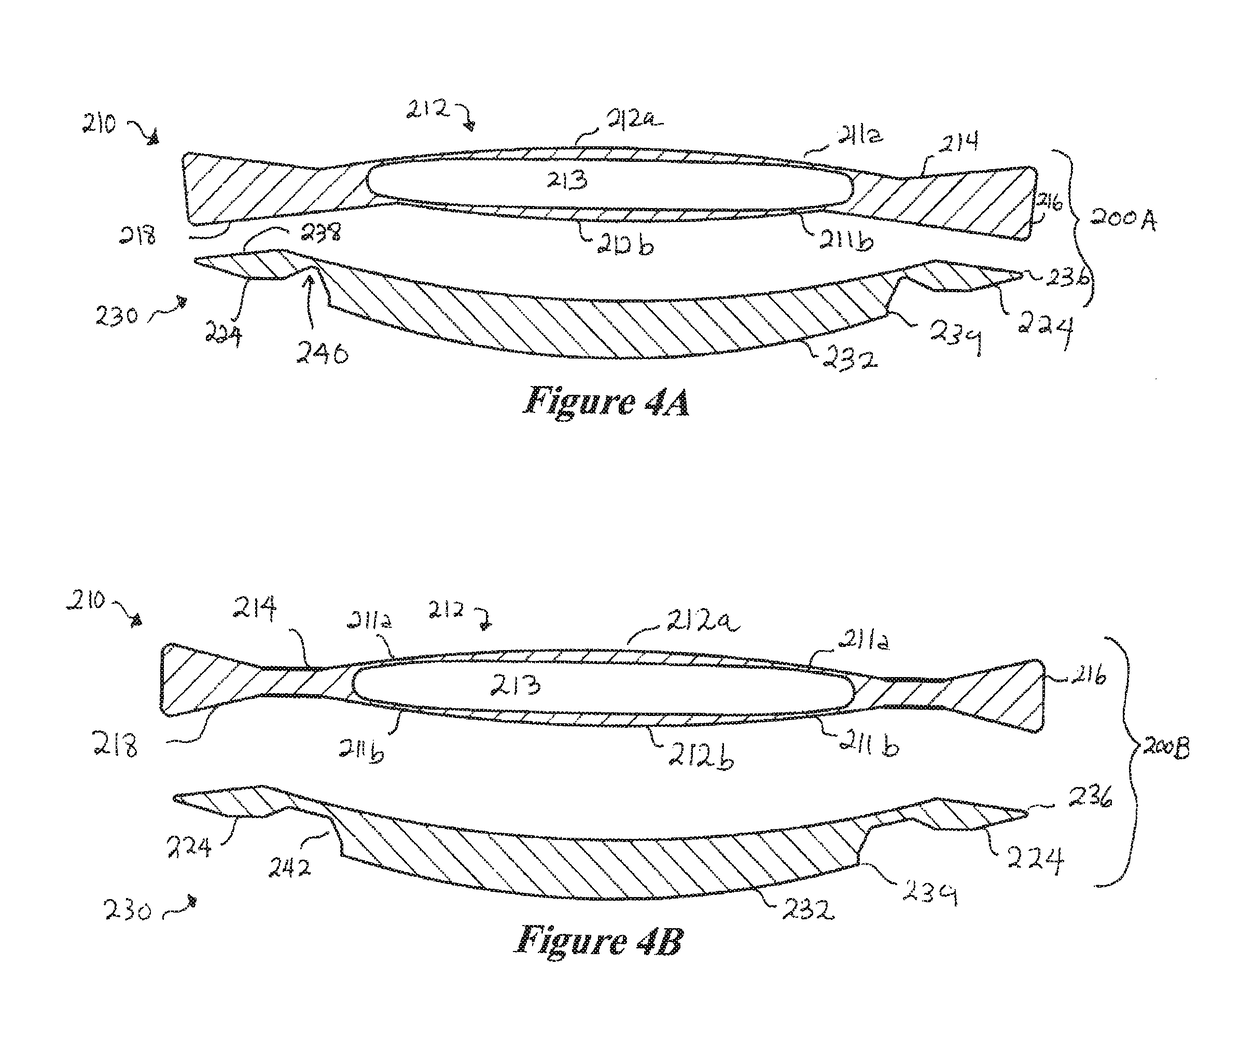 Two-part accomodating intraocular lens device